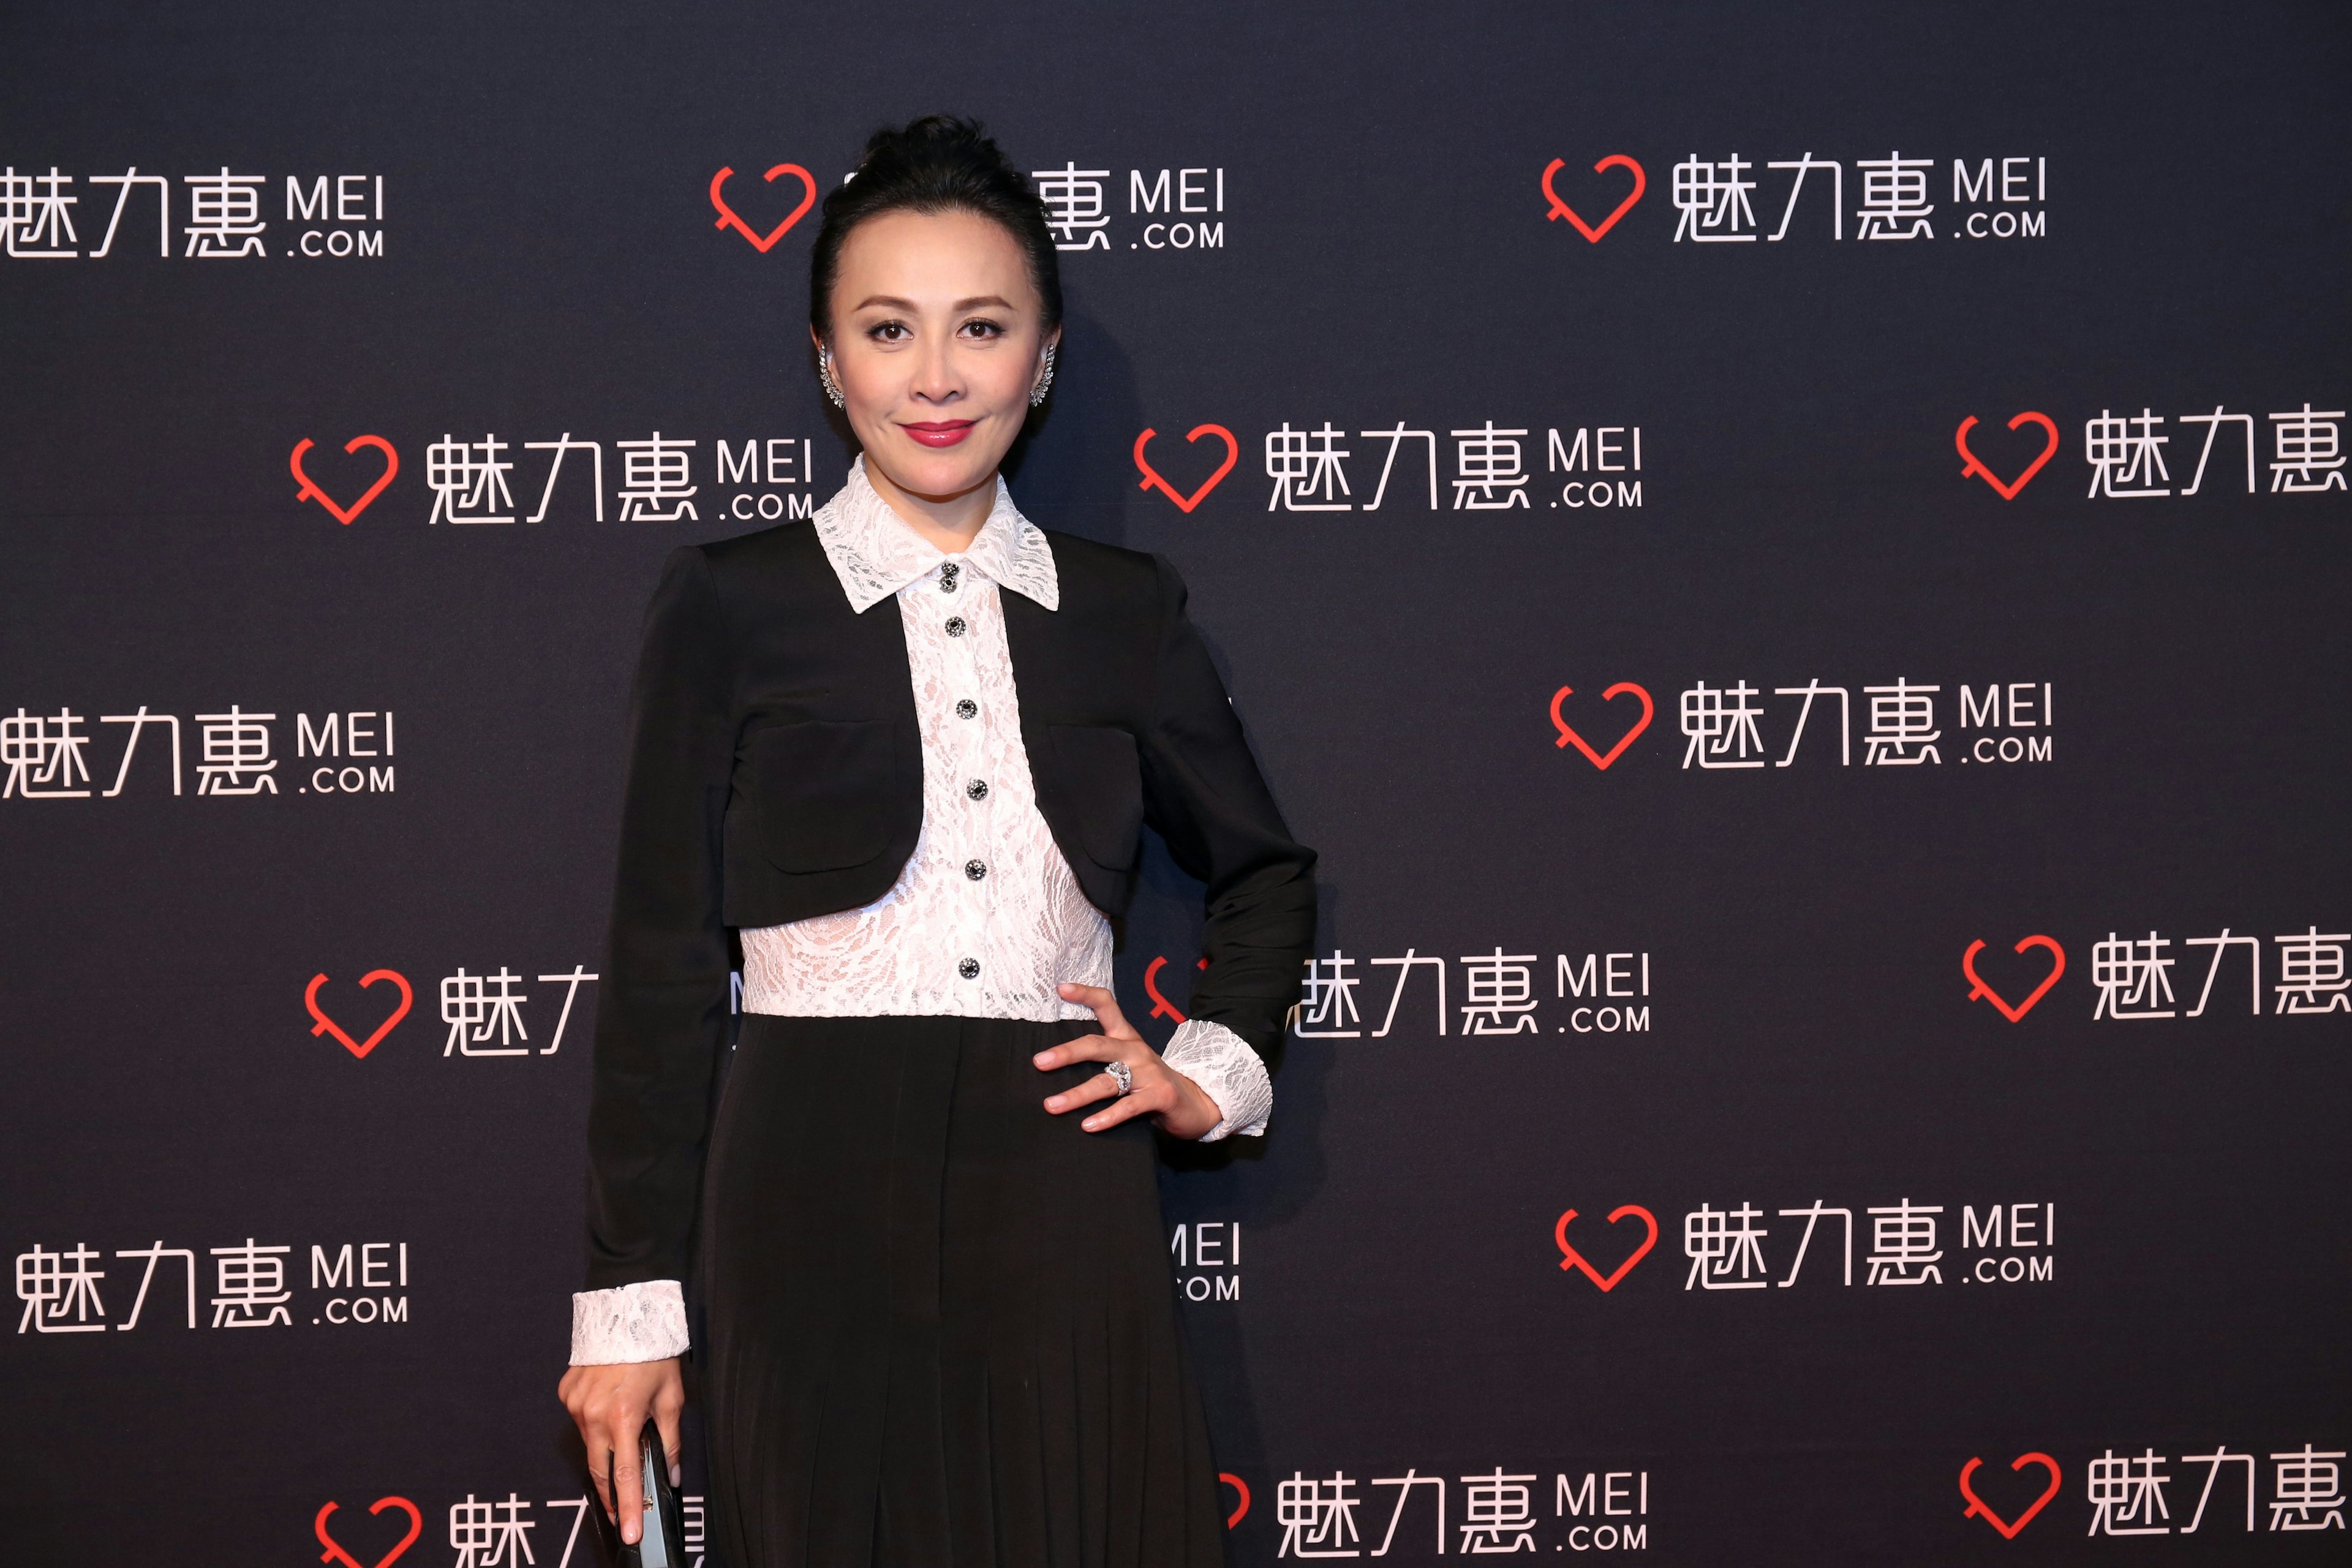 Actress Carina Lau at Mei.com's launch event for its 916 online shopping festival in Shanghai on Tuesday, September 13, 2016. (Courtesy Photo)